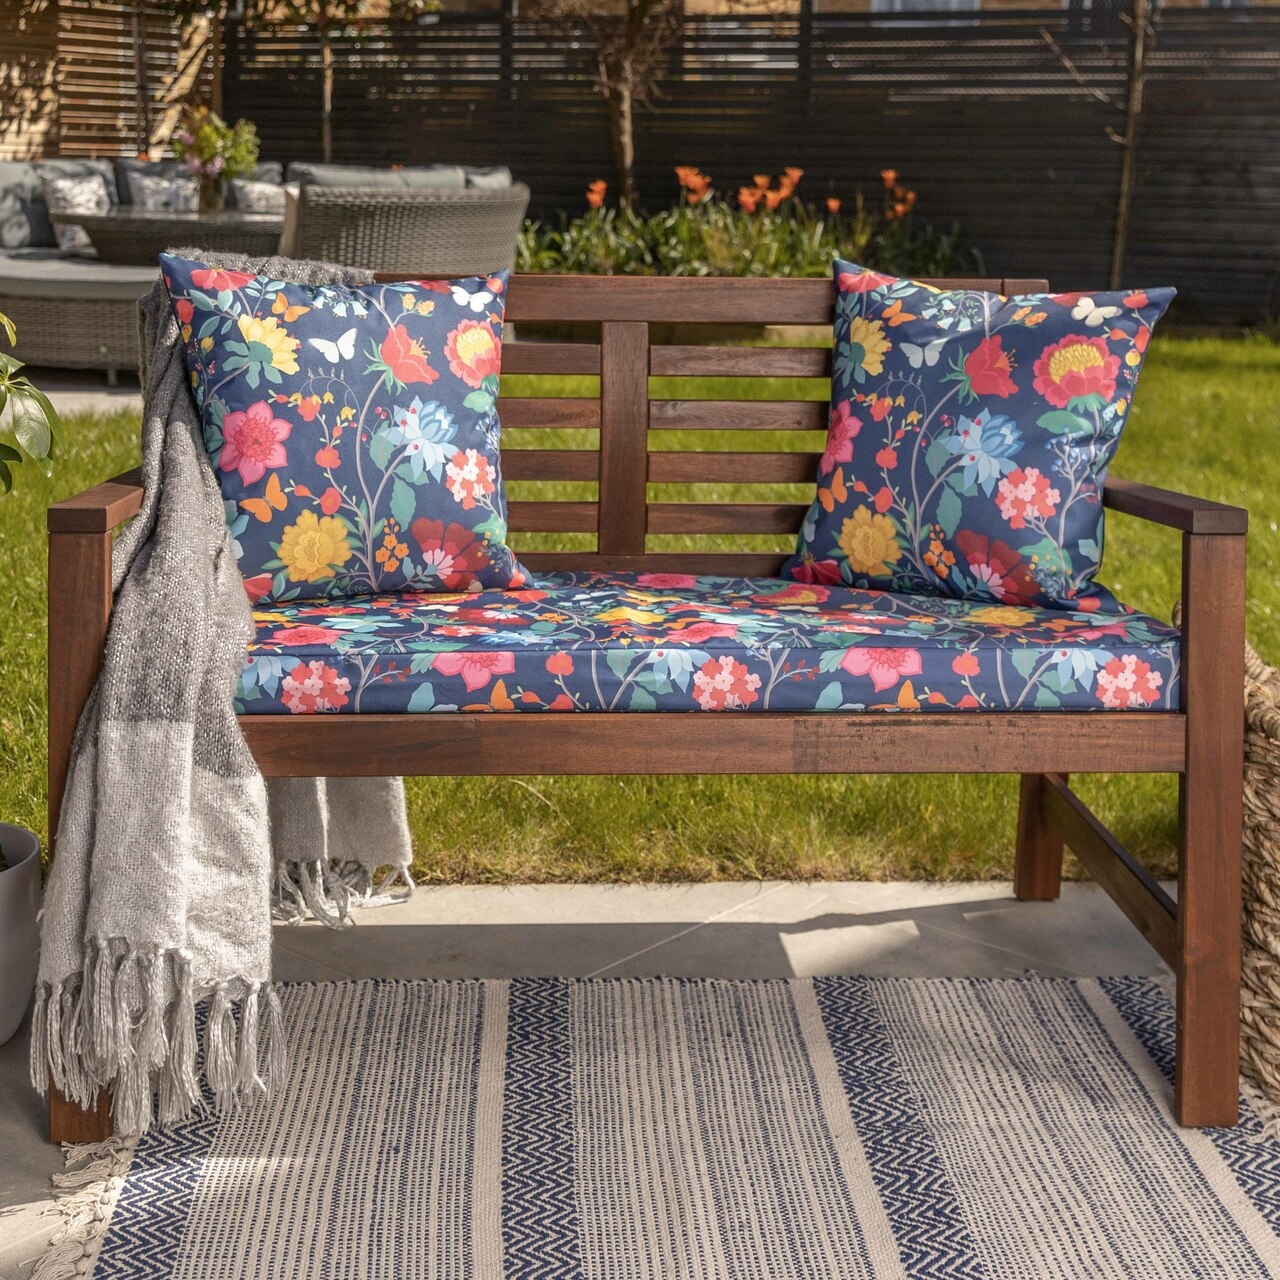 Celina Digby Luxury Water Resistant Garden Outdoor Bench Seat Pad – Midsummer Night (Available in 2-Seater or 3-Seater Size) (144cm x 54cm 6cm)